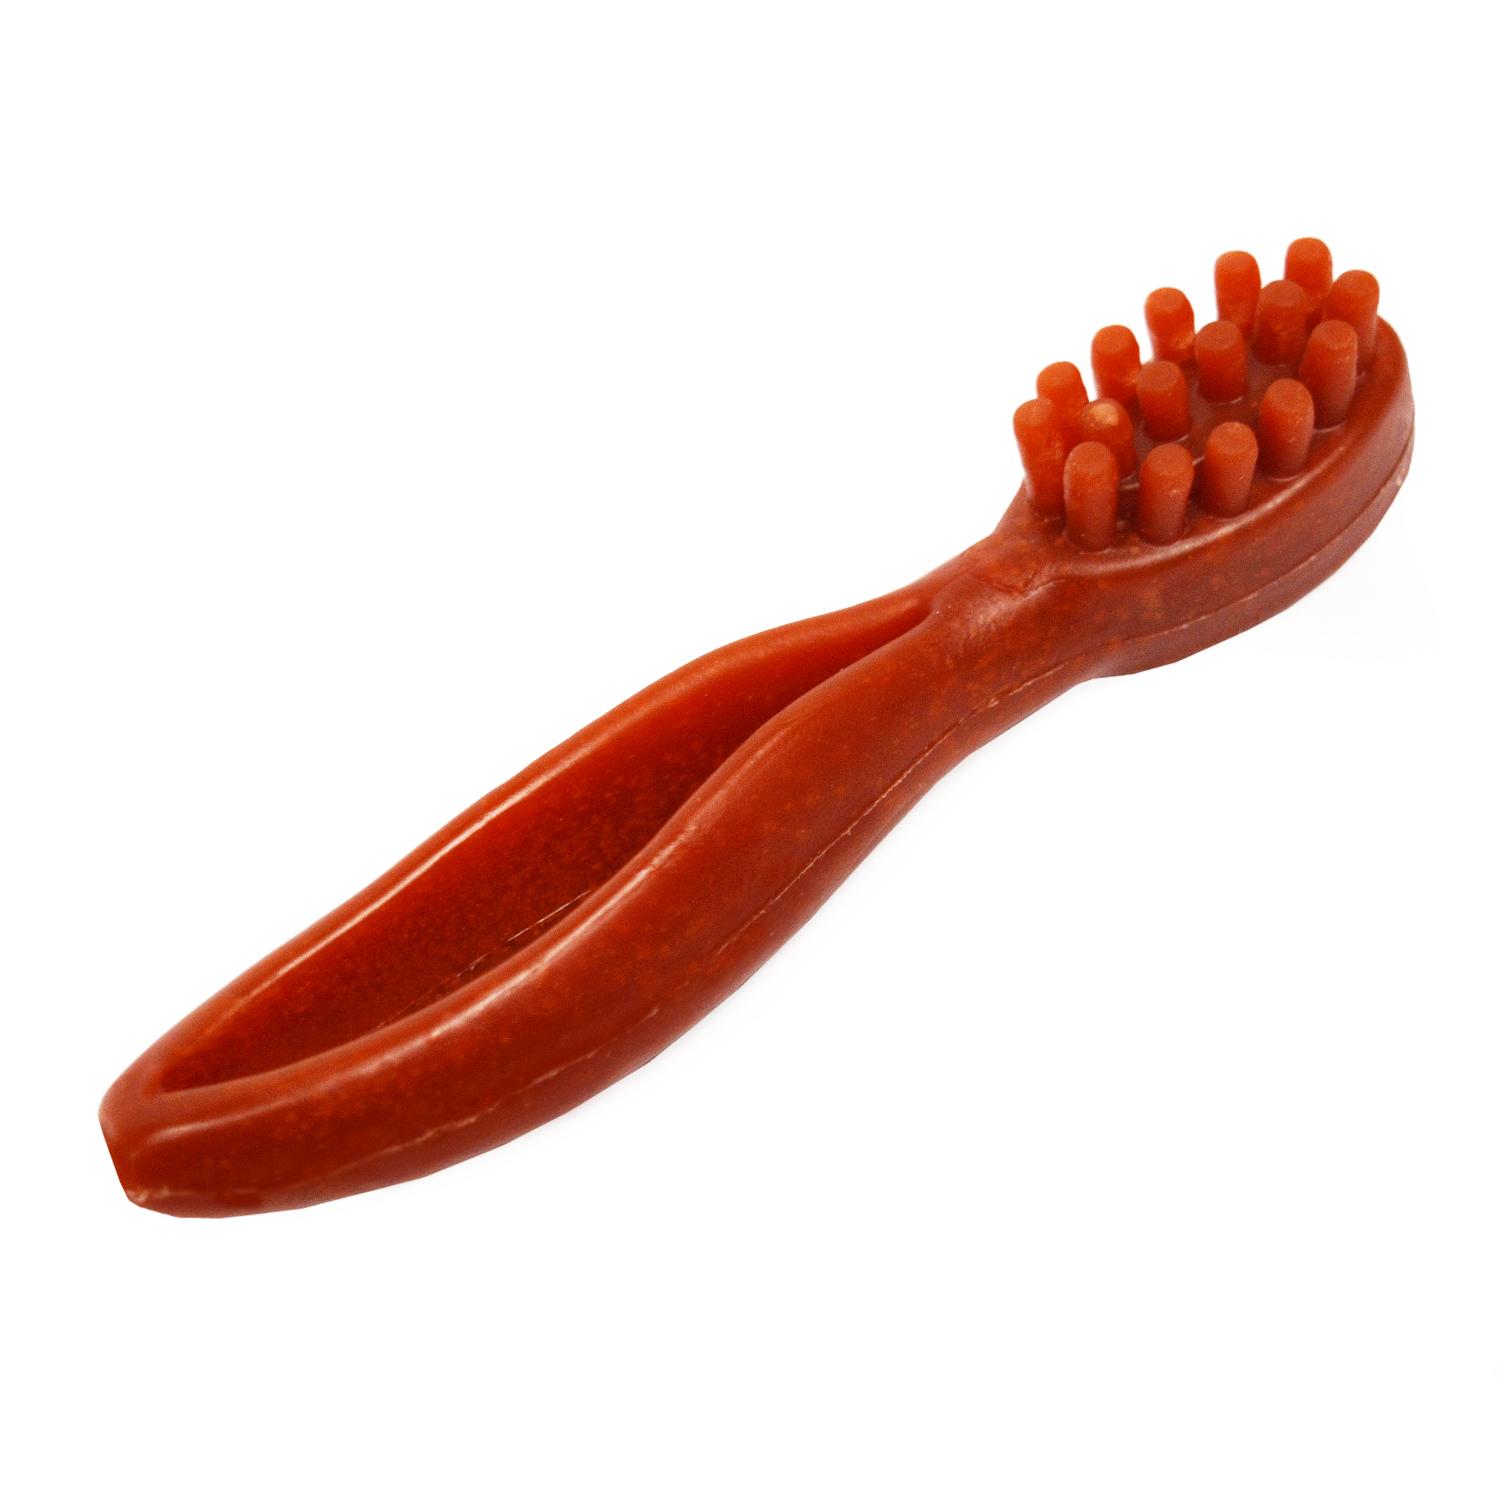 A large red Cerea toothbrush shaped vegan dog chew